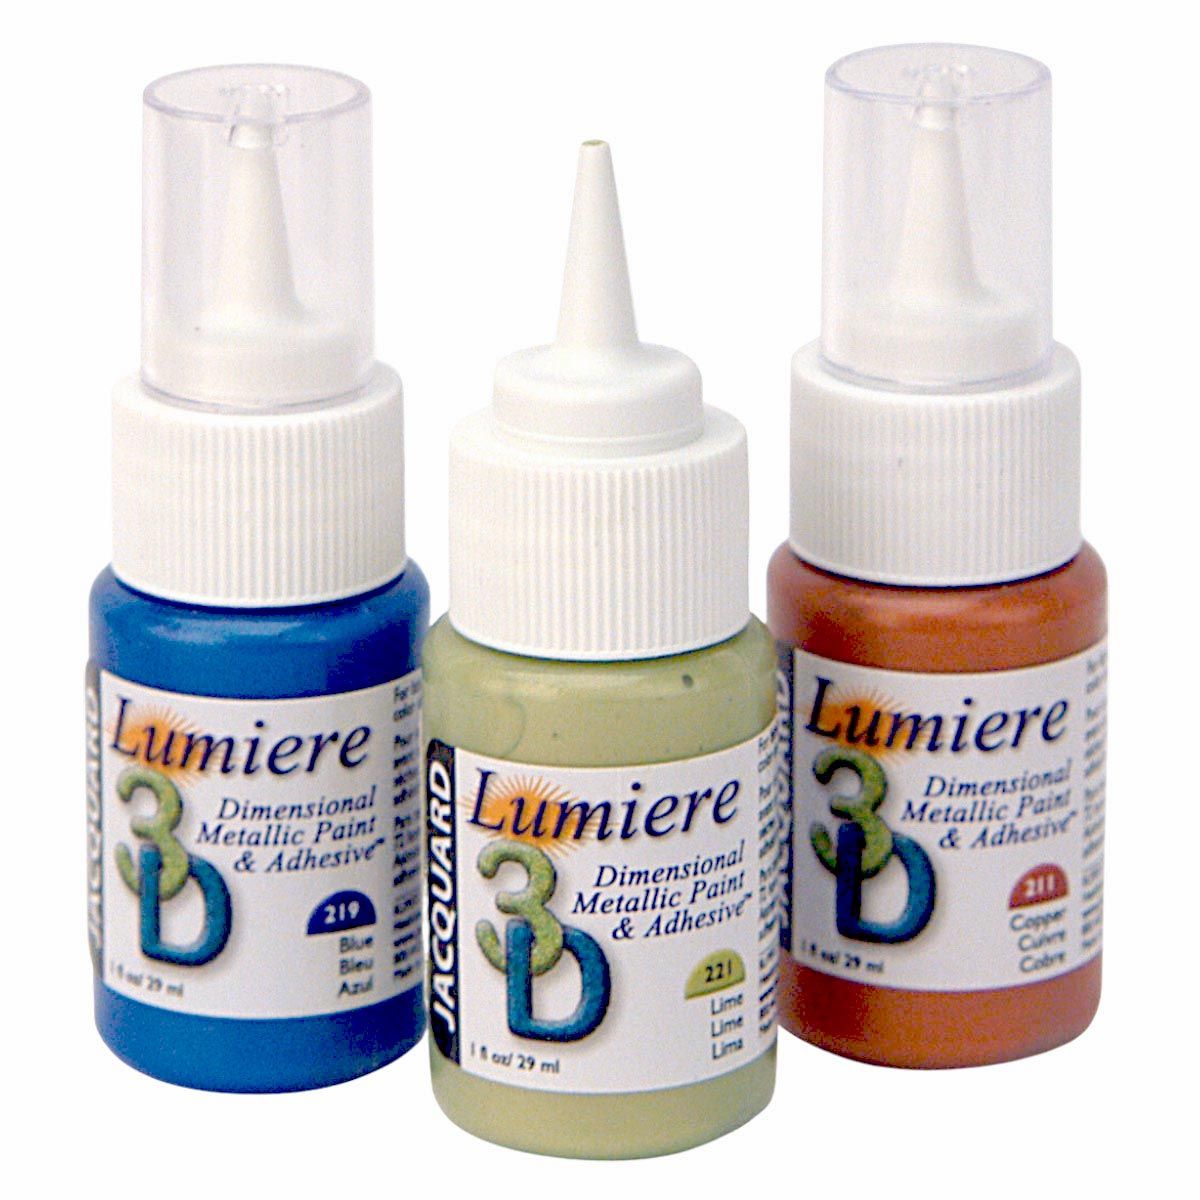 Jacquard Lumiere 3D Metallic Paint and Adhesive Colours